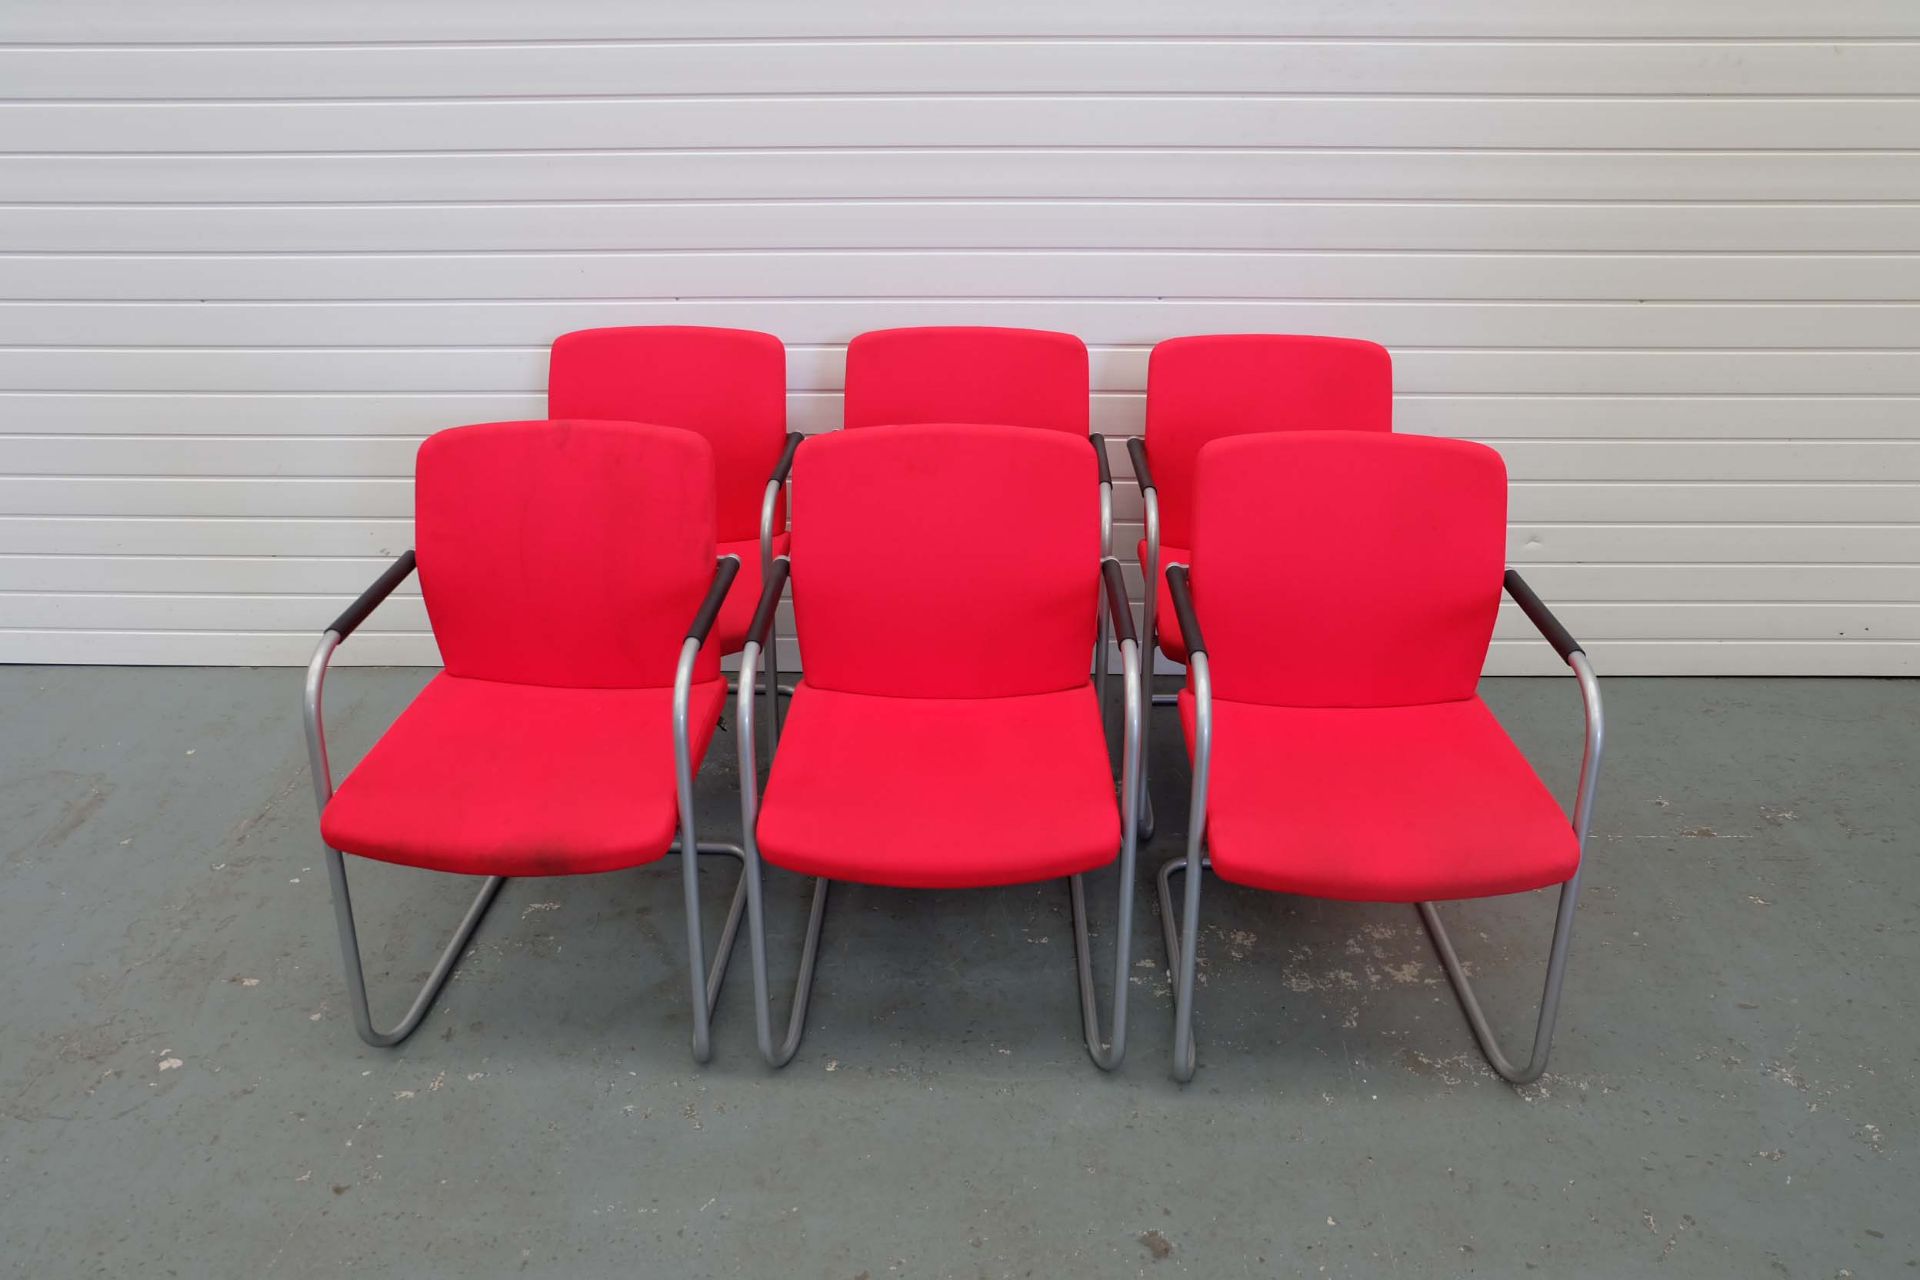 VERCO Set of 6 Red Stackable Chairs. - Image 2 of 4